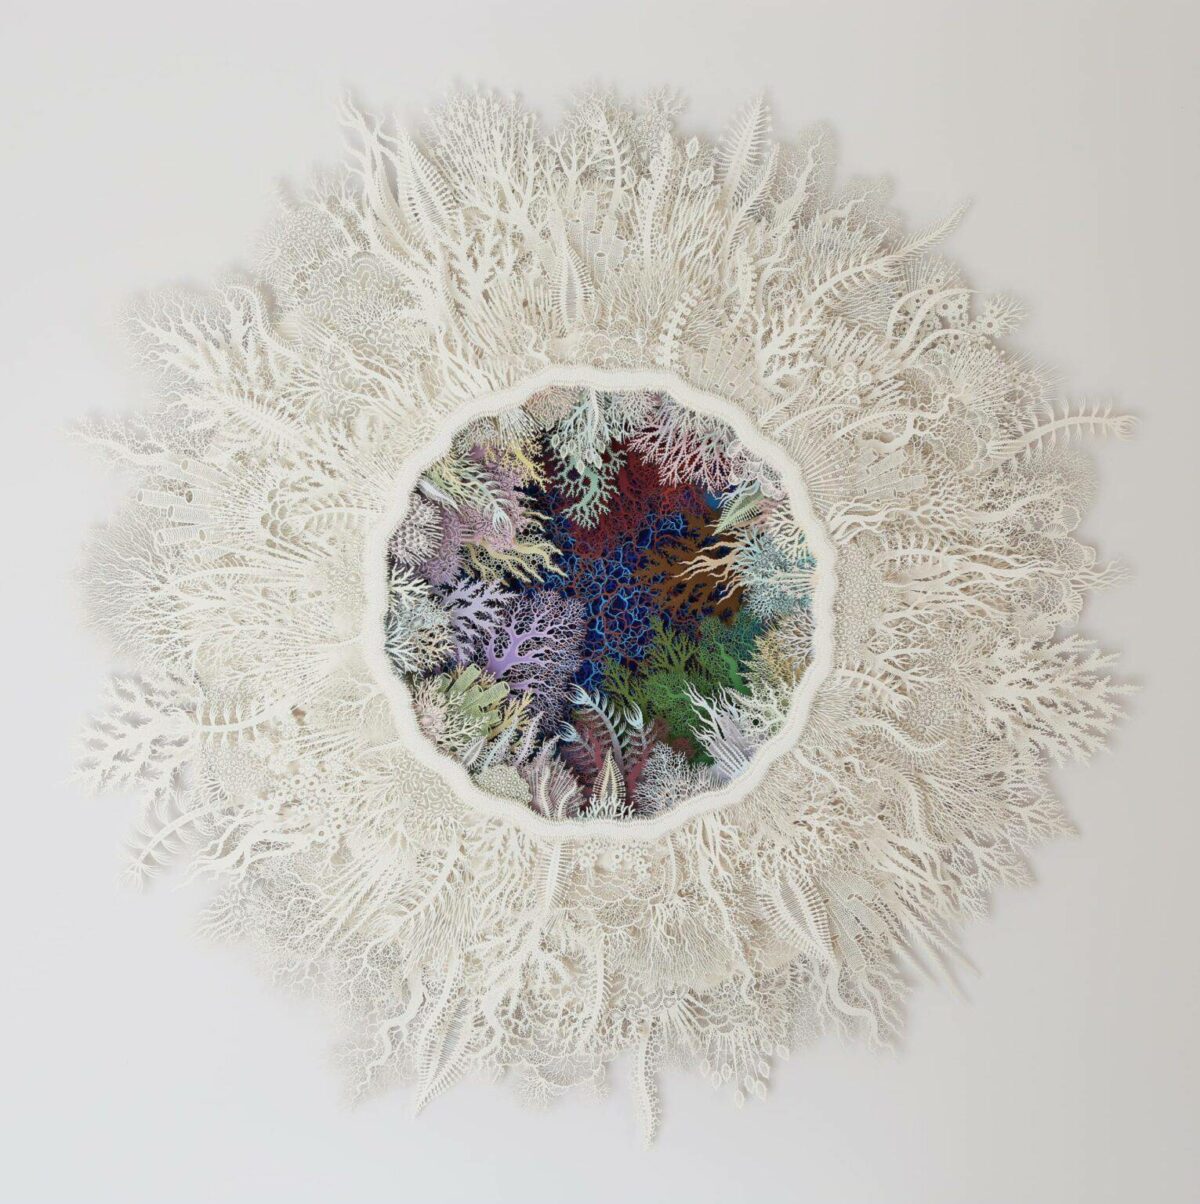 The Beautifully Intricate Paper Cut Sculptures Inspired By Corals And Microorganisms Of Rogan Brown 4